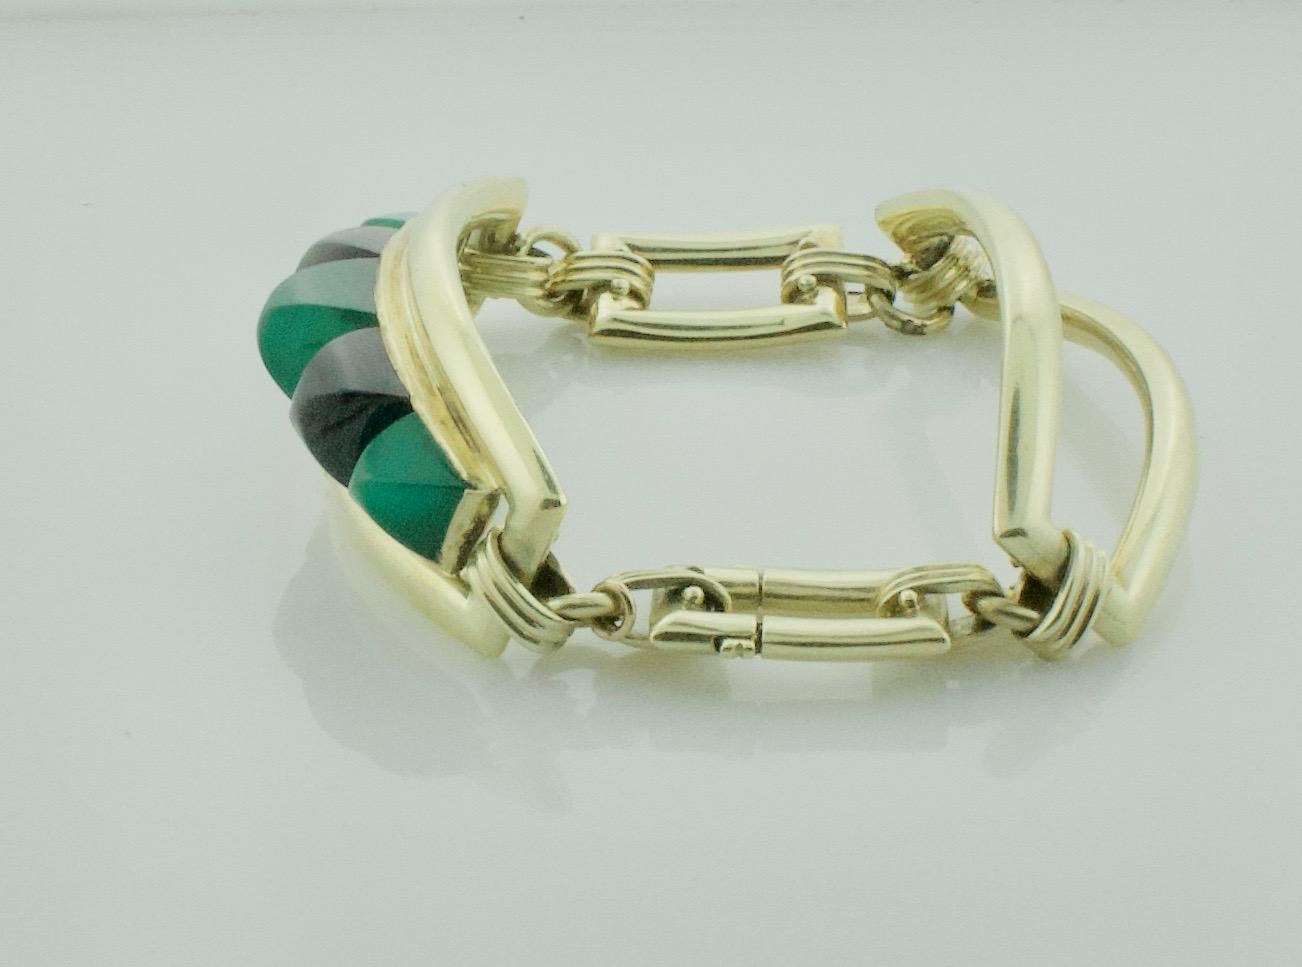 Astounding Chrysophrase and Onyx circa 1940s Bracelet in Yellow Gold For Sale 1